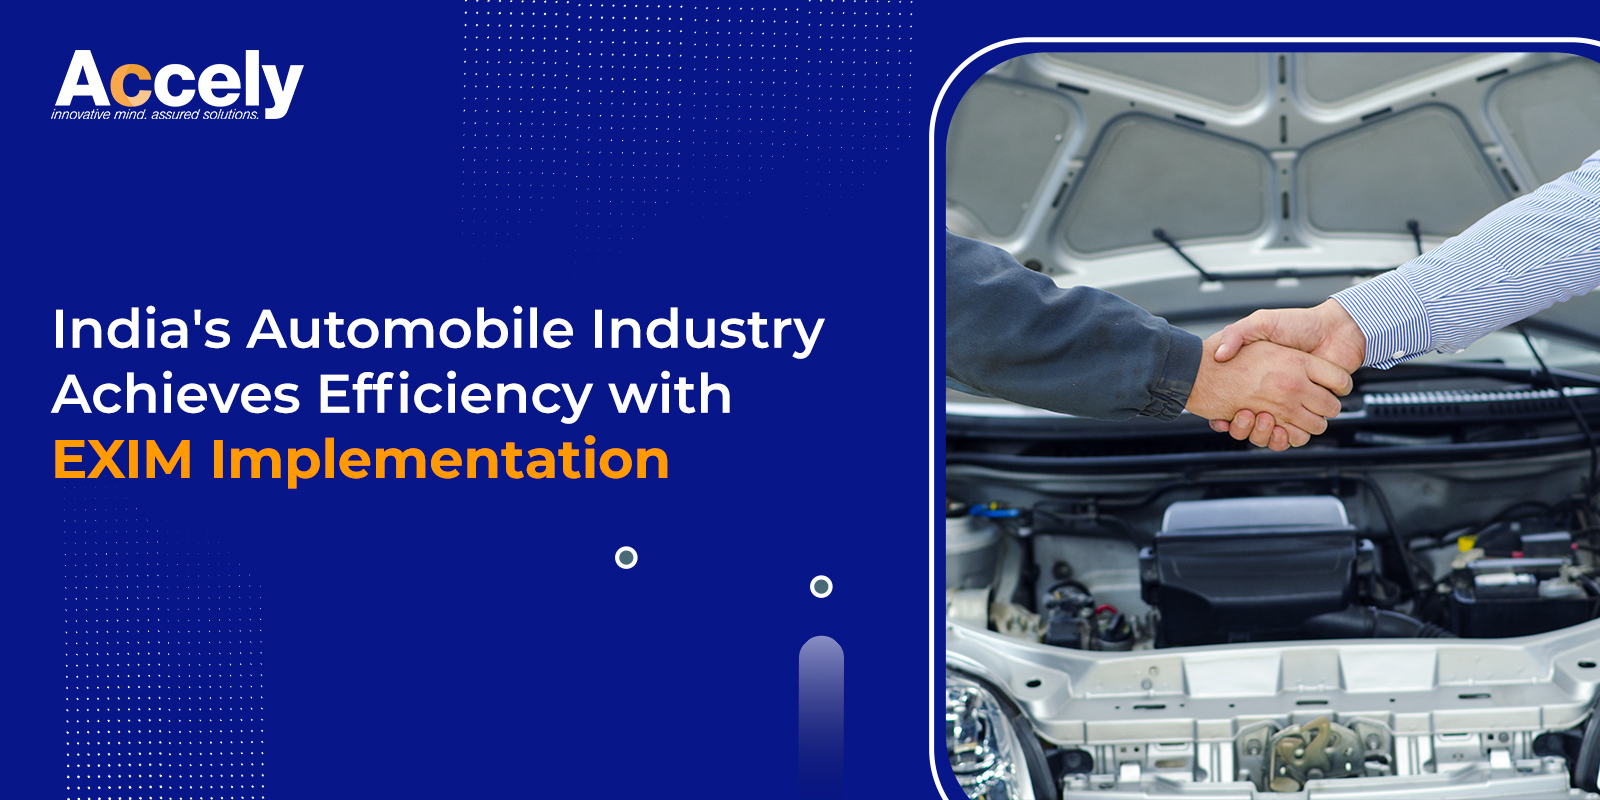 India's Automobile Industry Achieves Efficiency with EXIM Implementation